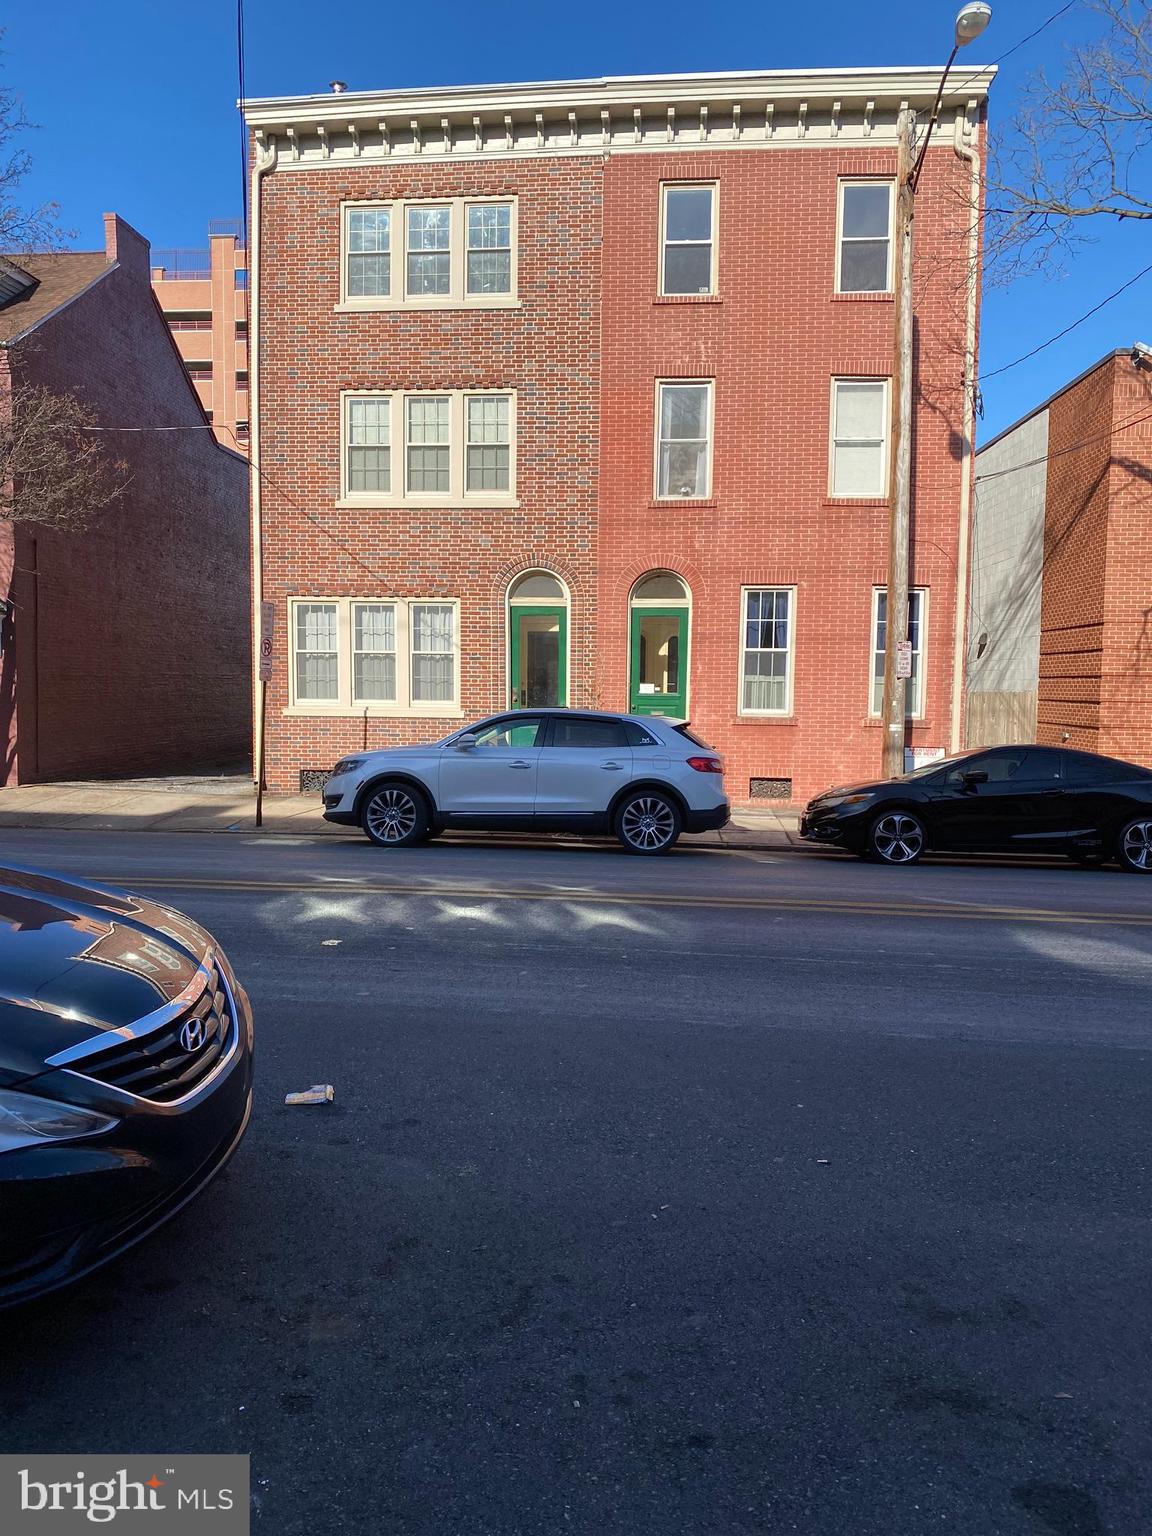 a couple of cars parked in front of a building